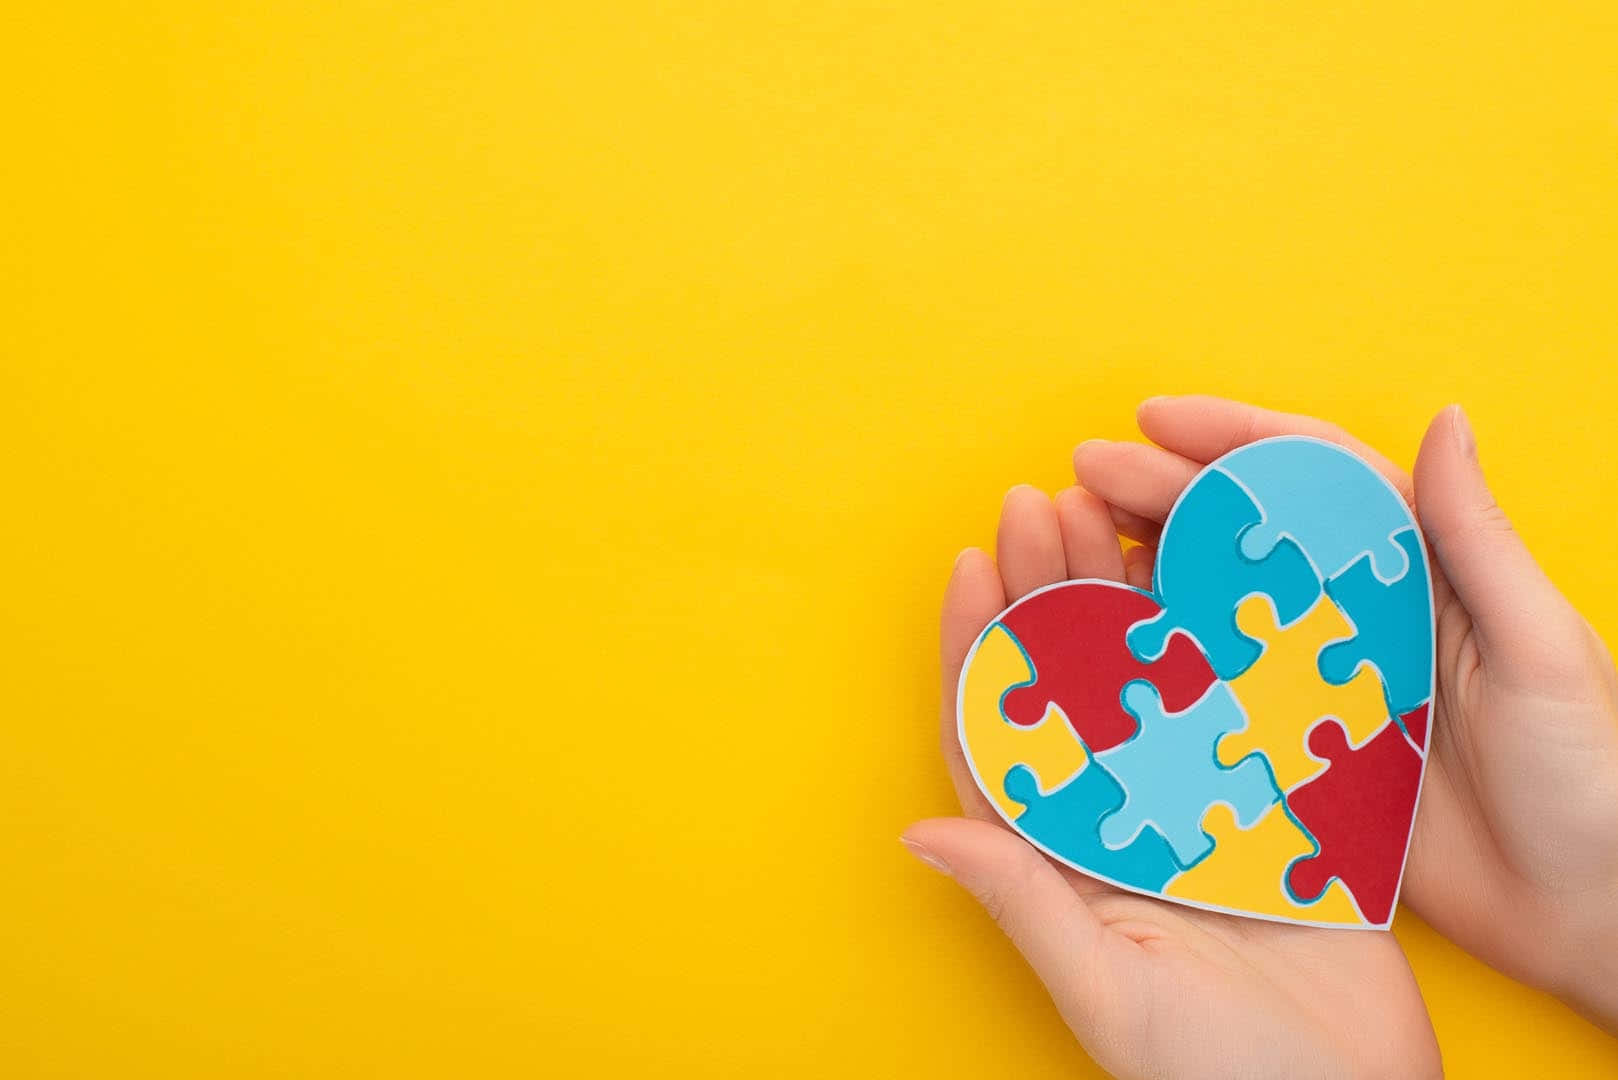 A Person's Hands Holding A Heart Shaped Puzzle Piece